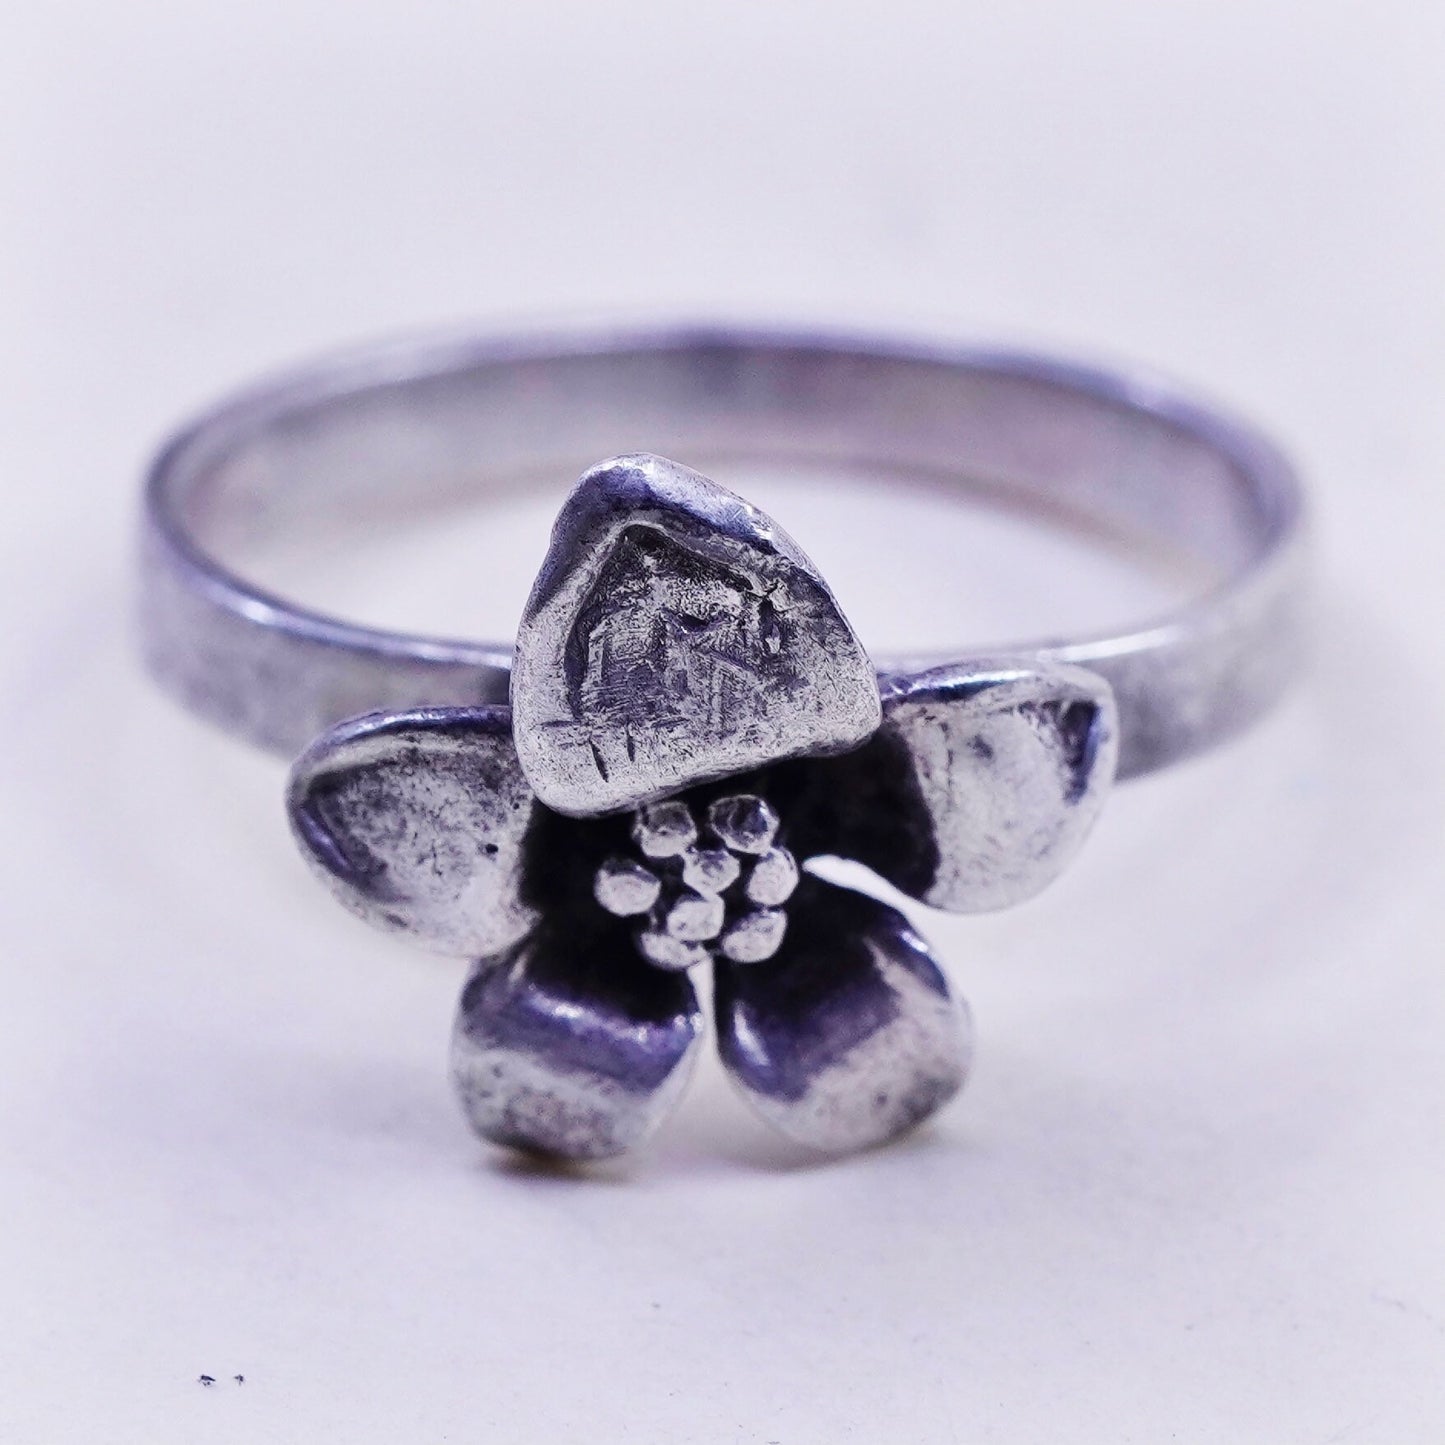 Size 5.5, vintage Sterling silver handmade ring, 925 lily flower